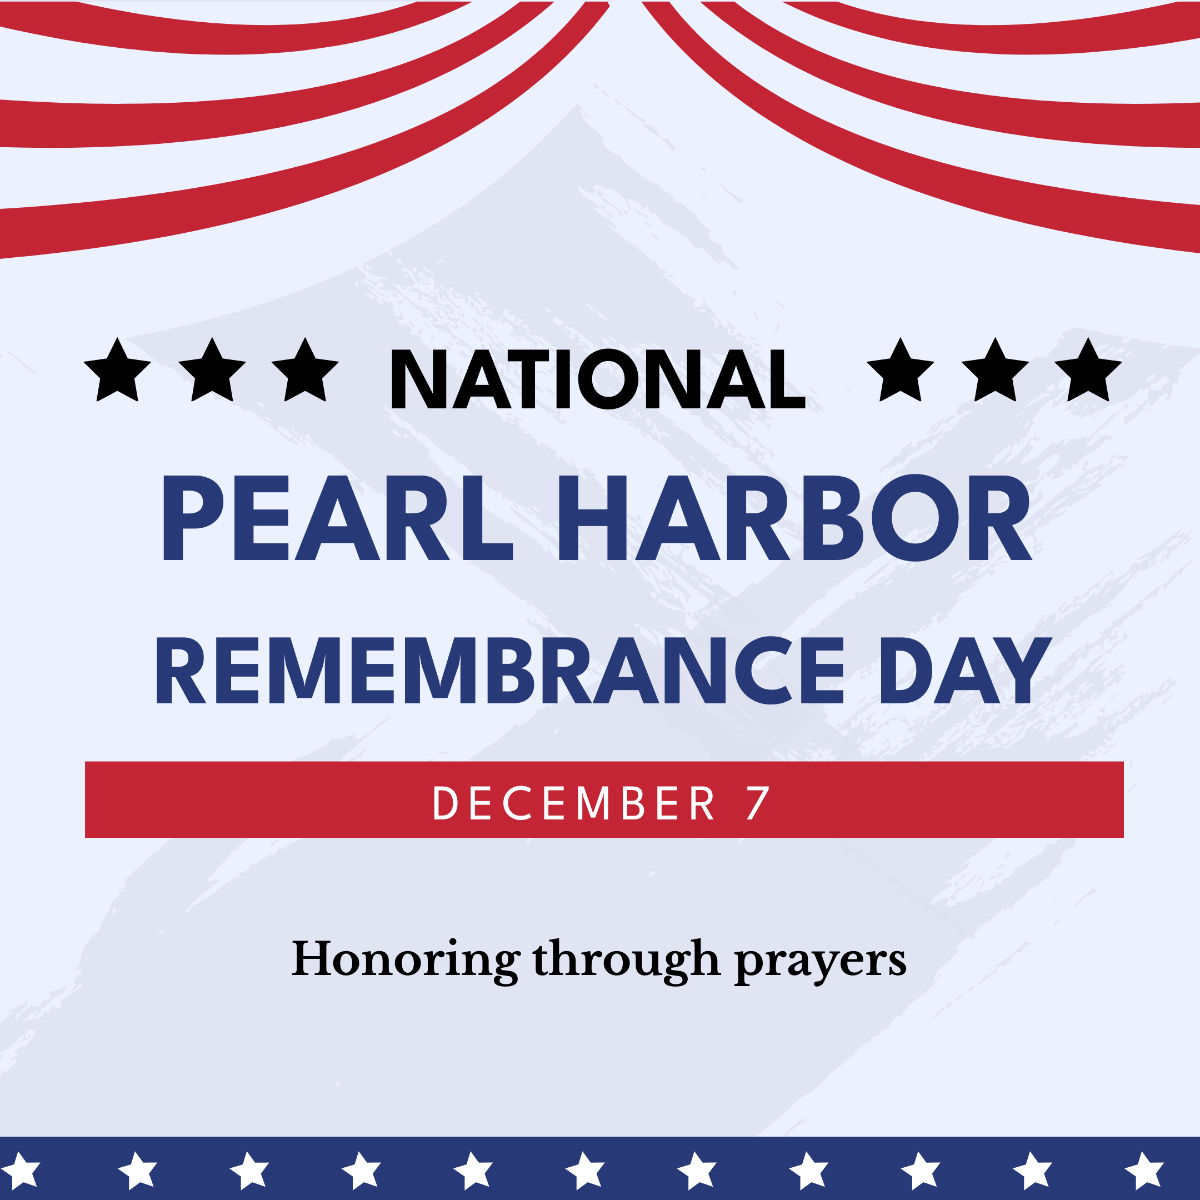 National Pearl Harbor Remembrance Day FB Post